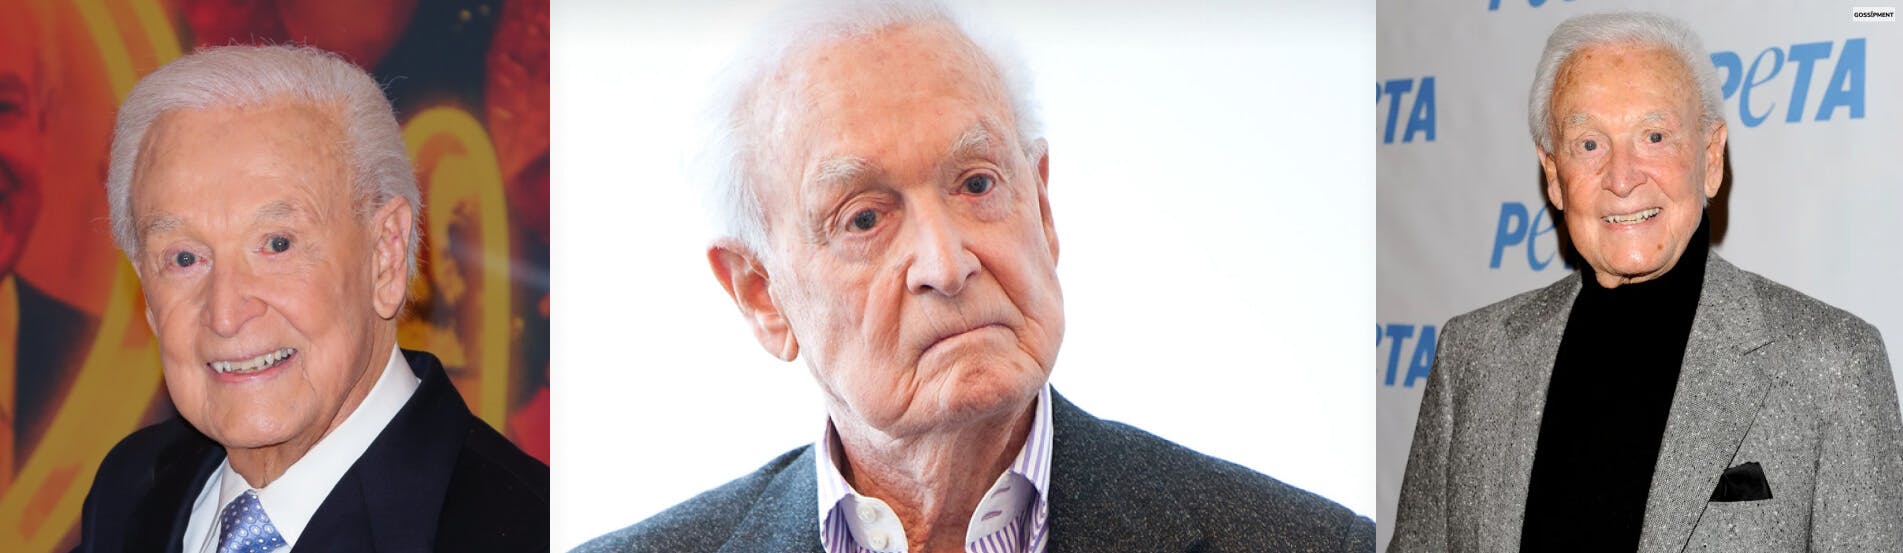 Cover Image for Bob Barker’s Cause Of Death Revealed To Be Alzheimer’s